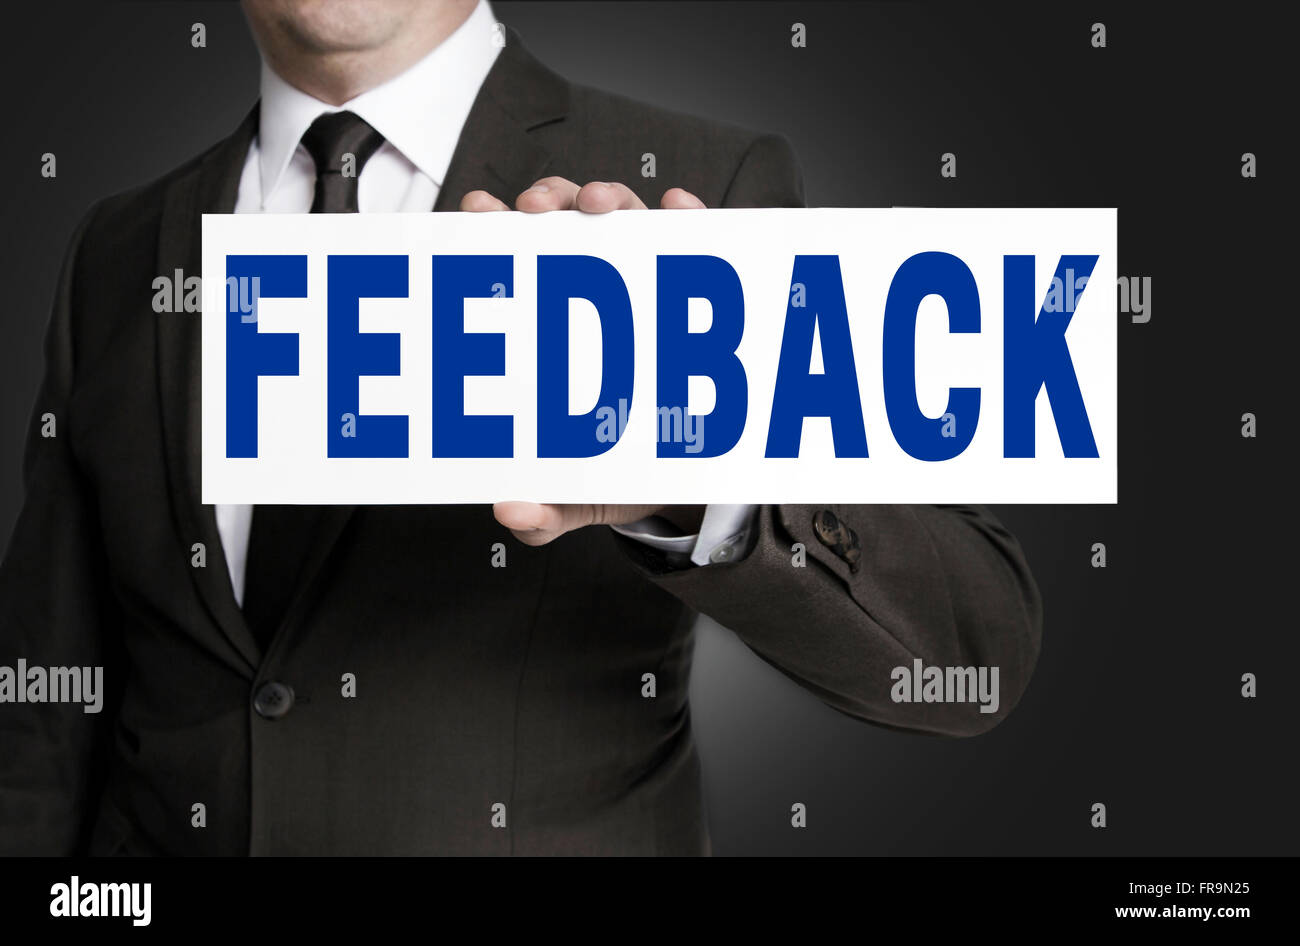 feedback sign is held by businessman background. Stock Photo